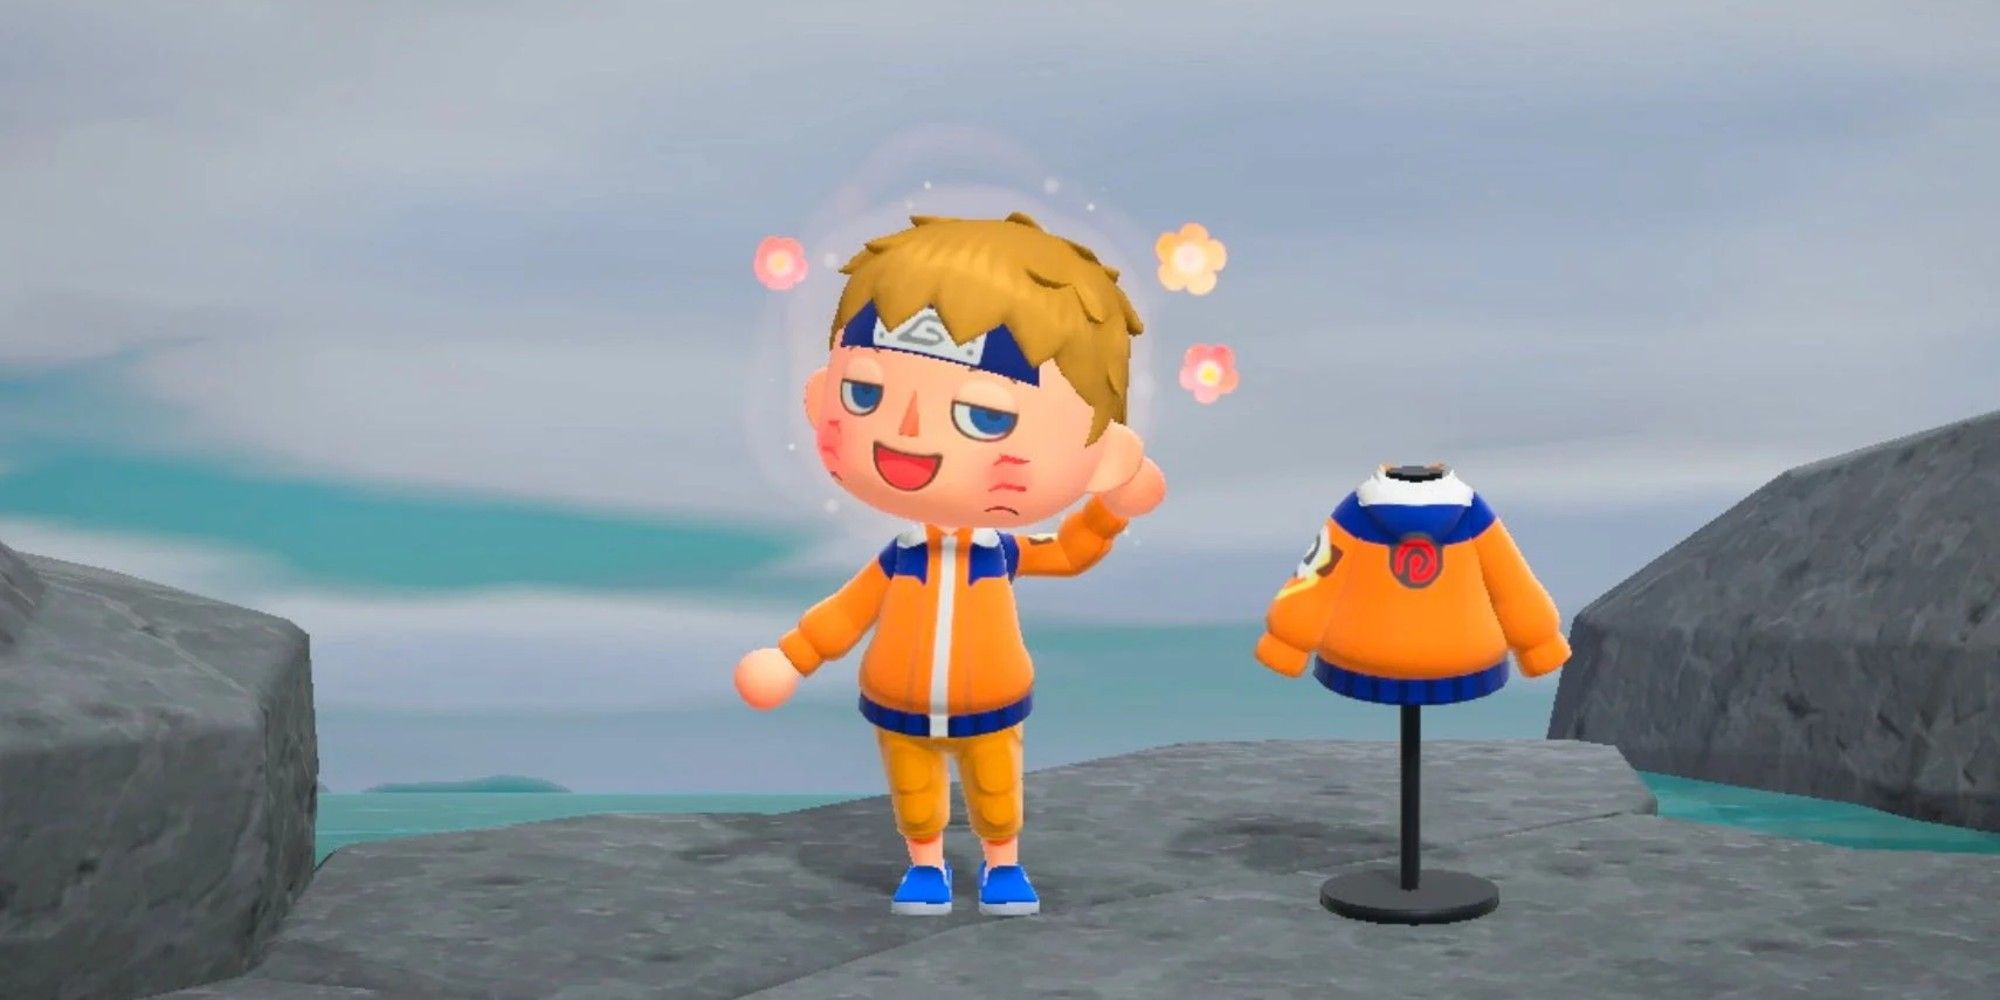 Naruto Inspired Design Ideas & Tips in Animal Crossing New Horizons